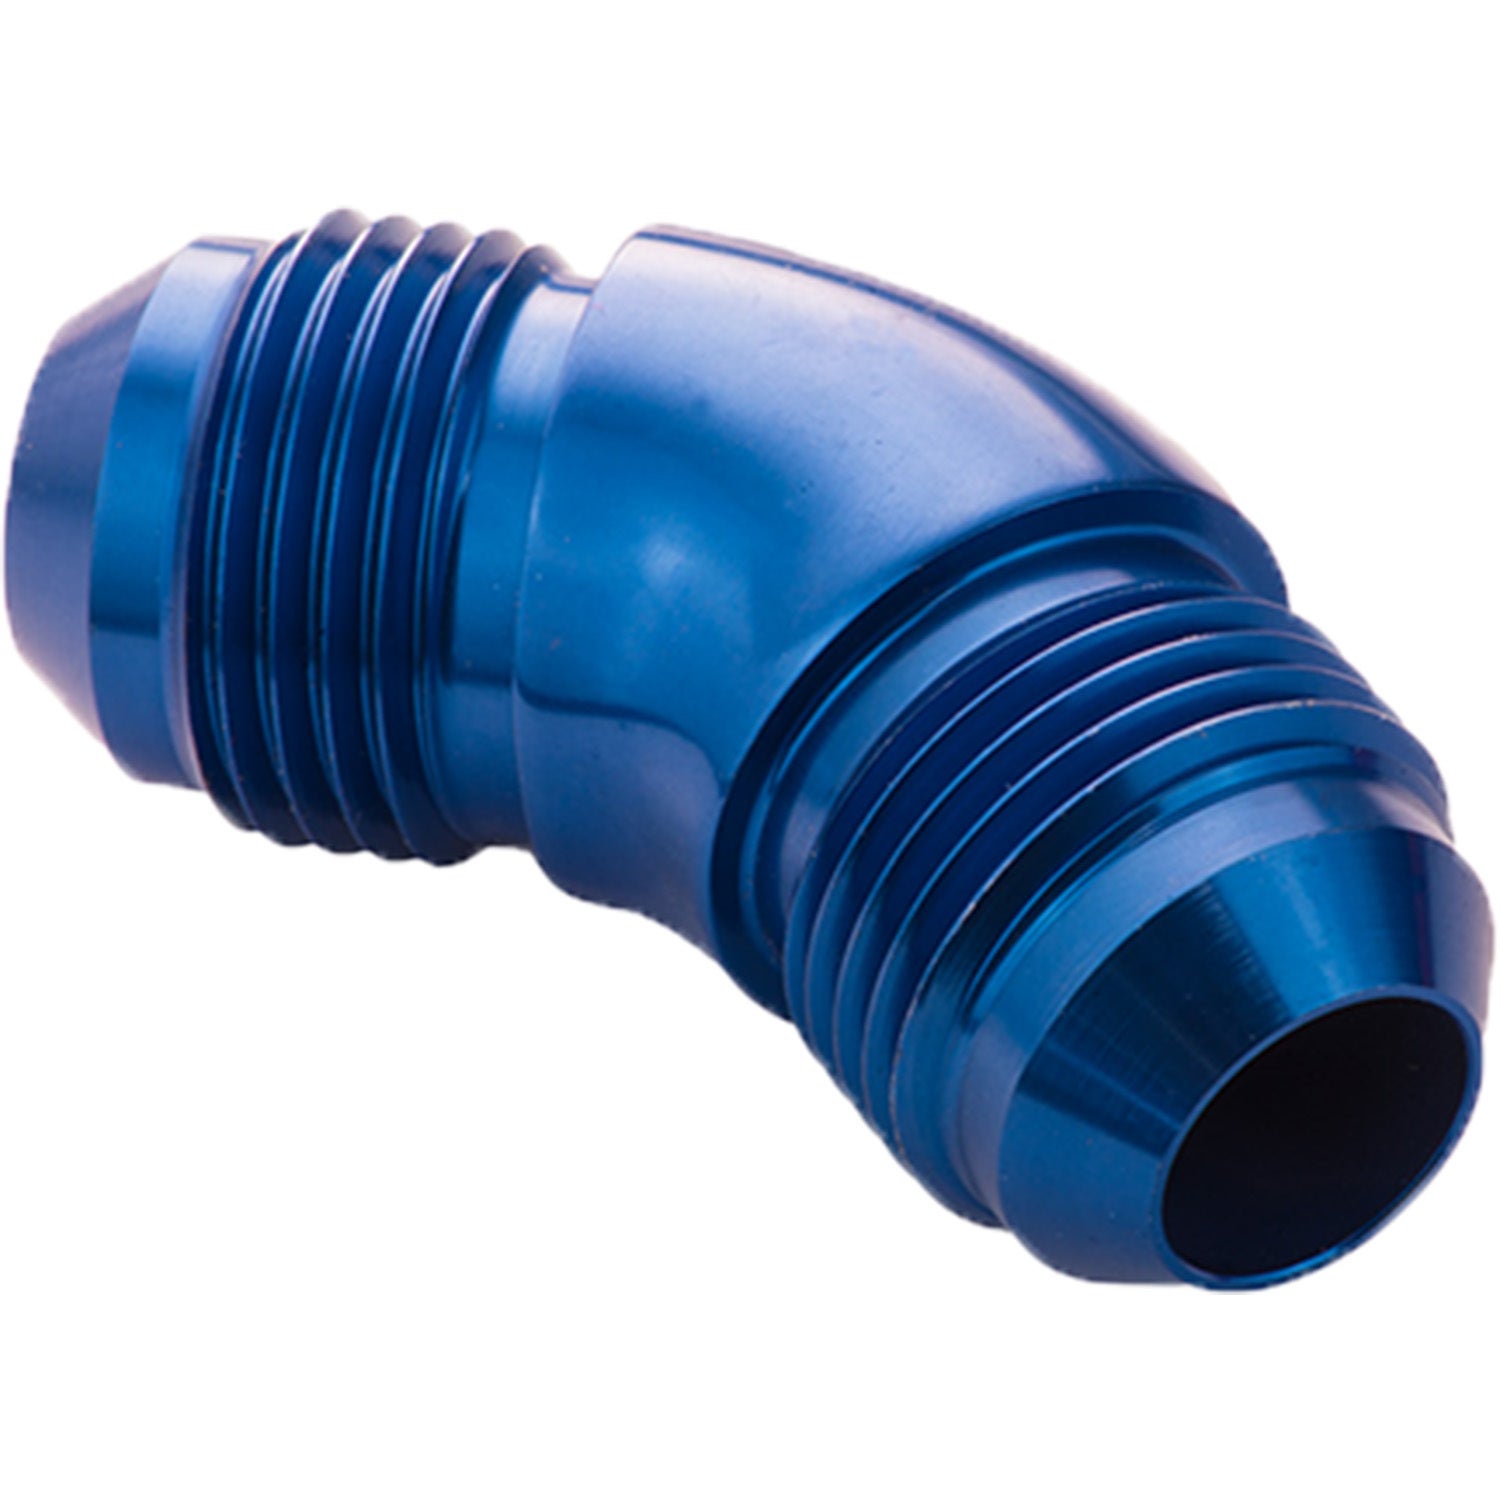 Proflow 45 Degree Union Flare Adaptor Fitting -06AN Blue PFE527-06